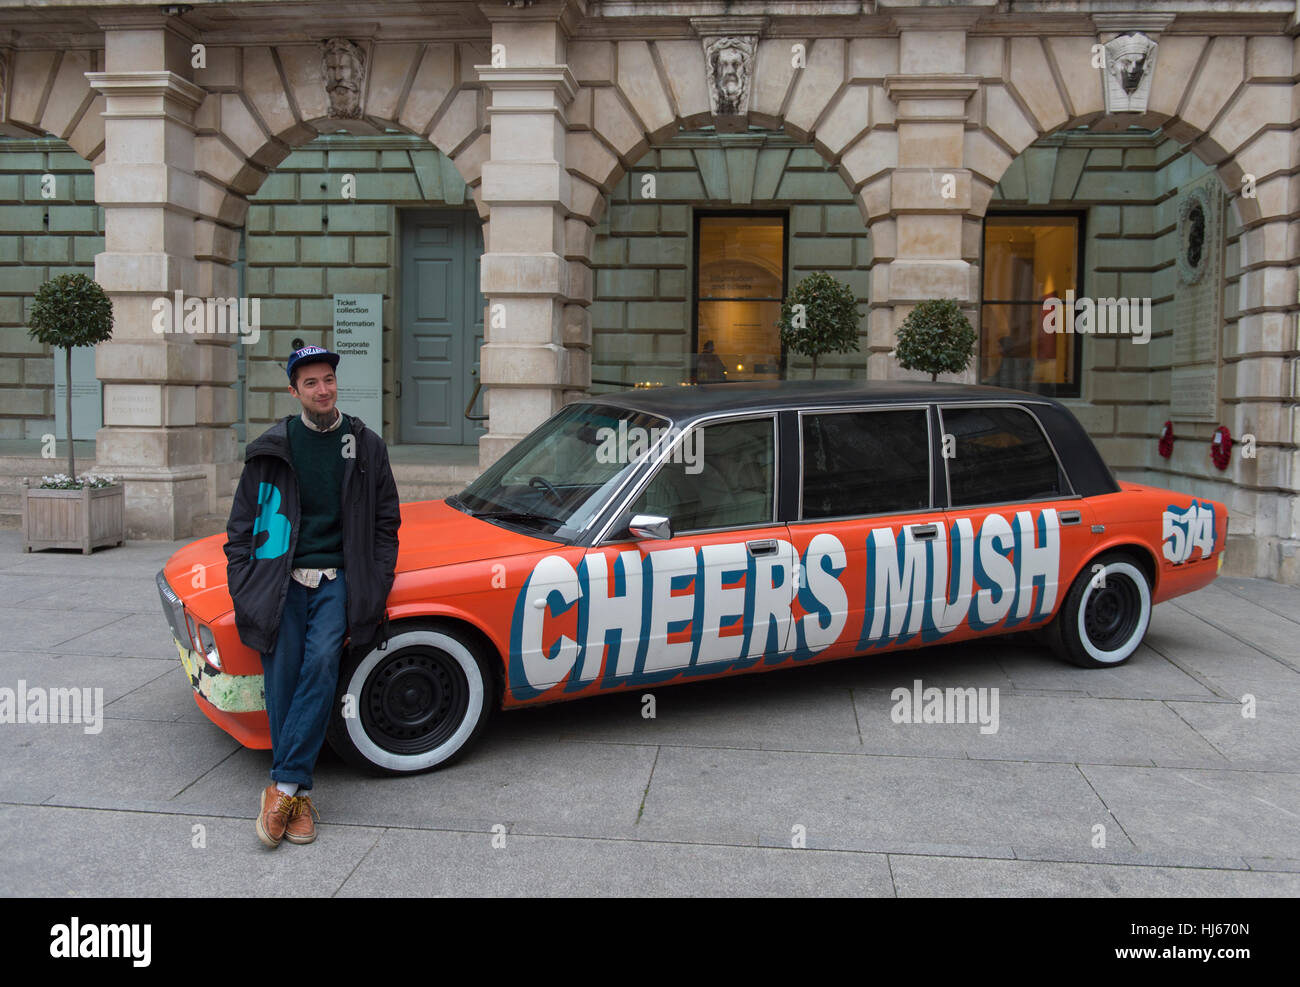 Royal Academy, London, UK. 26th January, 2017. Premiums Interim Projects presents an opportunity to view new work by 13 second year students at the interim point of their postgraduate study at the RA Schools, the UK’s longest established art school. Thomas Langley, artist, with Chavy boy - a Daimler xj6 limousine, polyurethane, glass, sound. © Malcolm Park editorial/Alamy Live News. Stock Photo